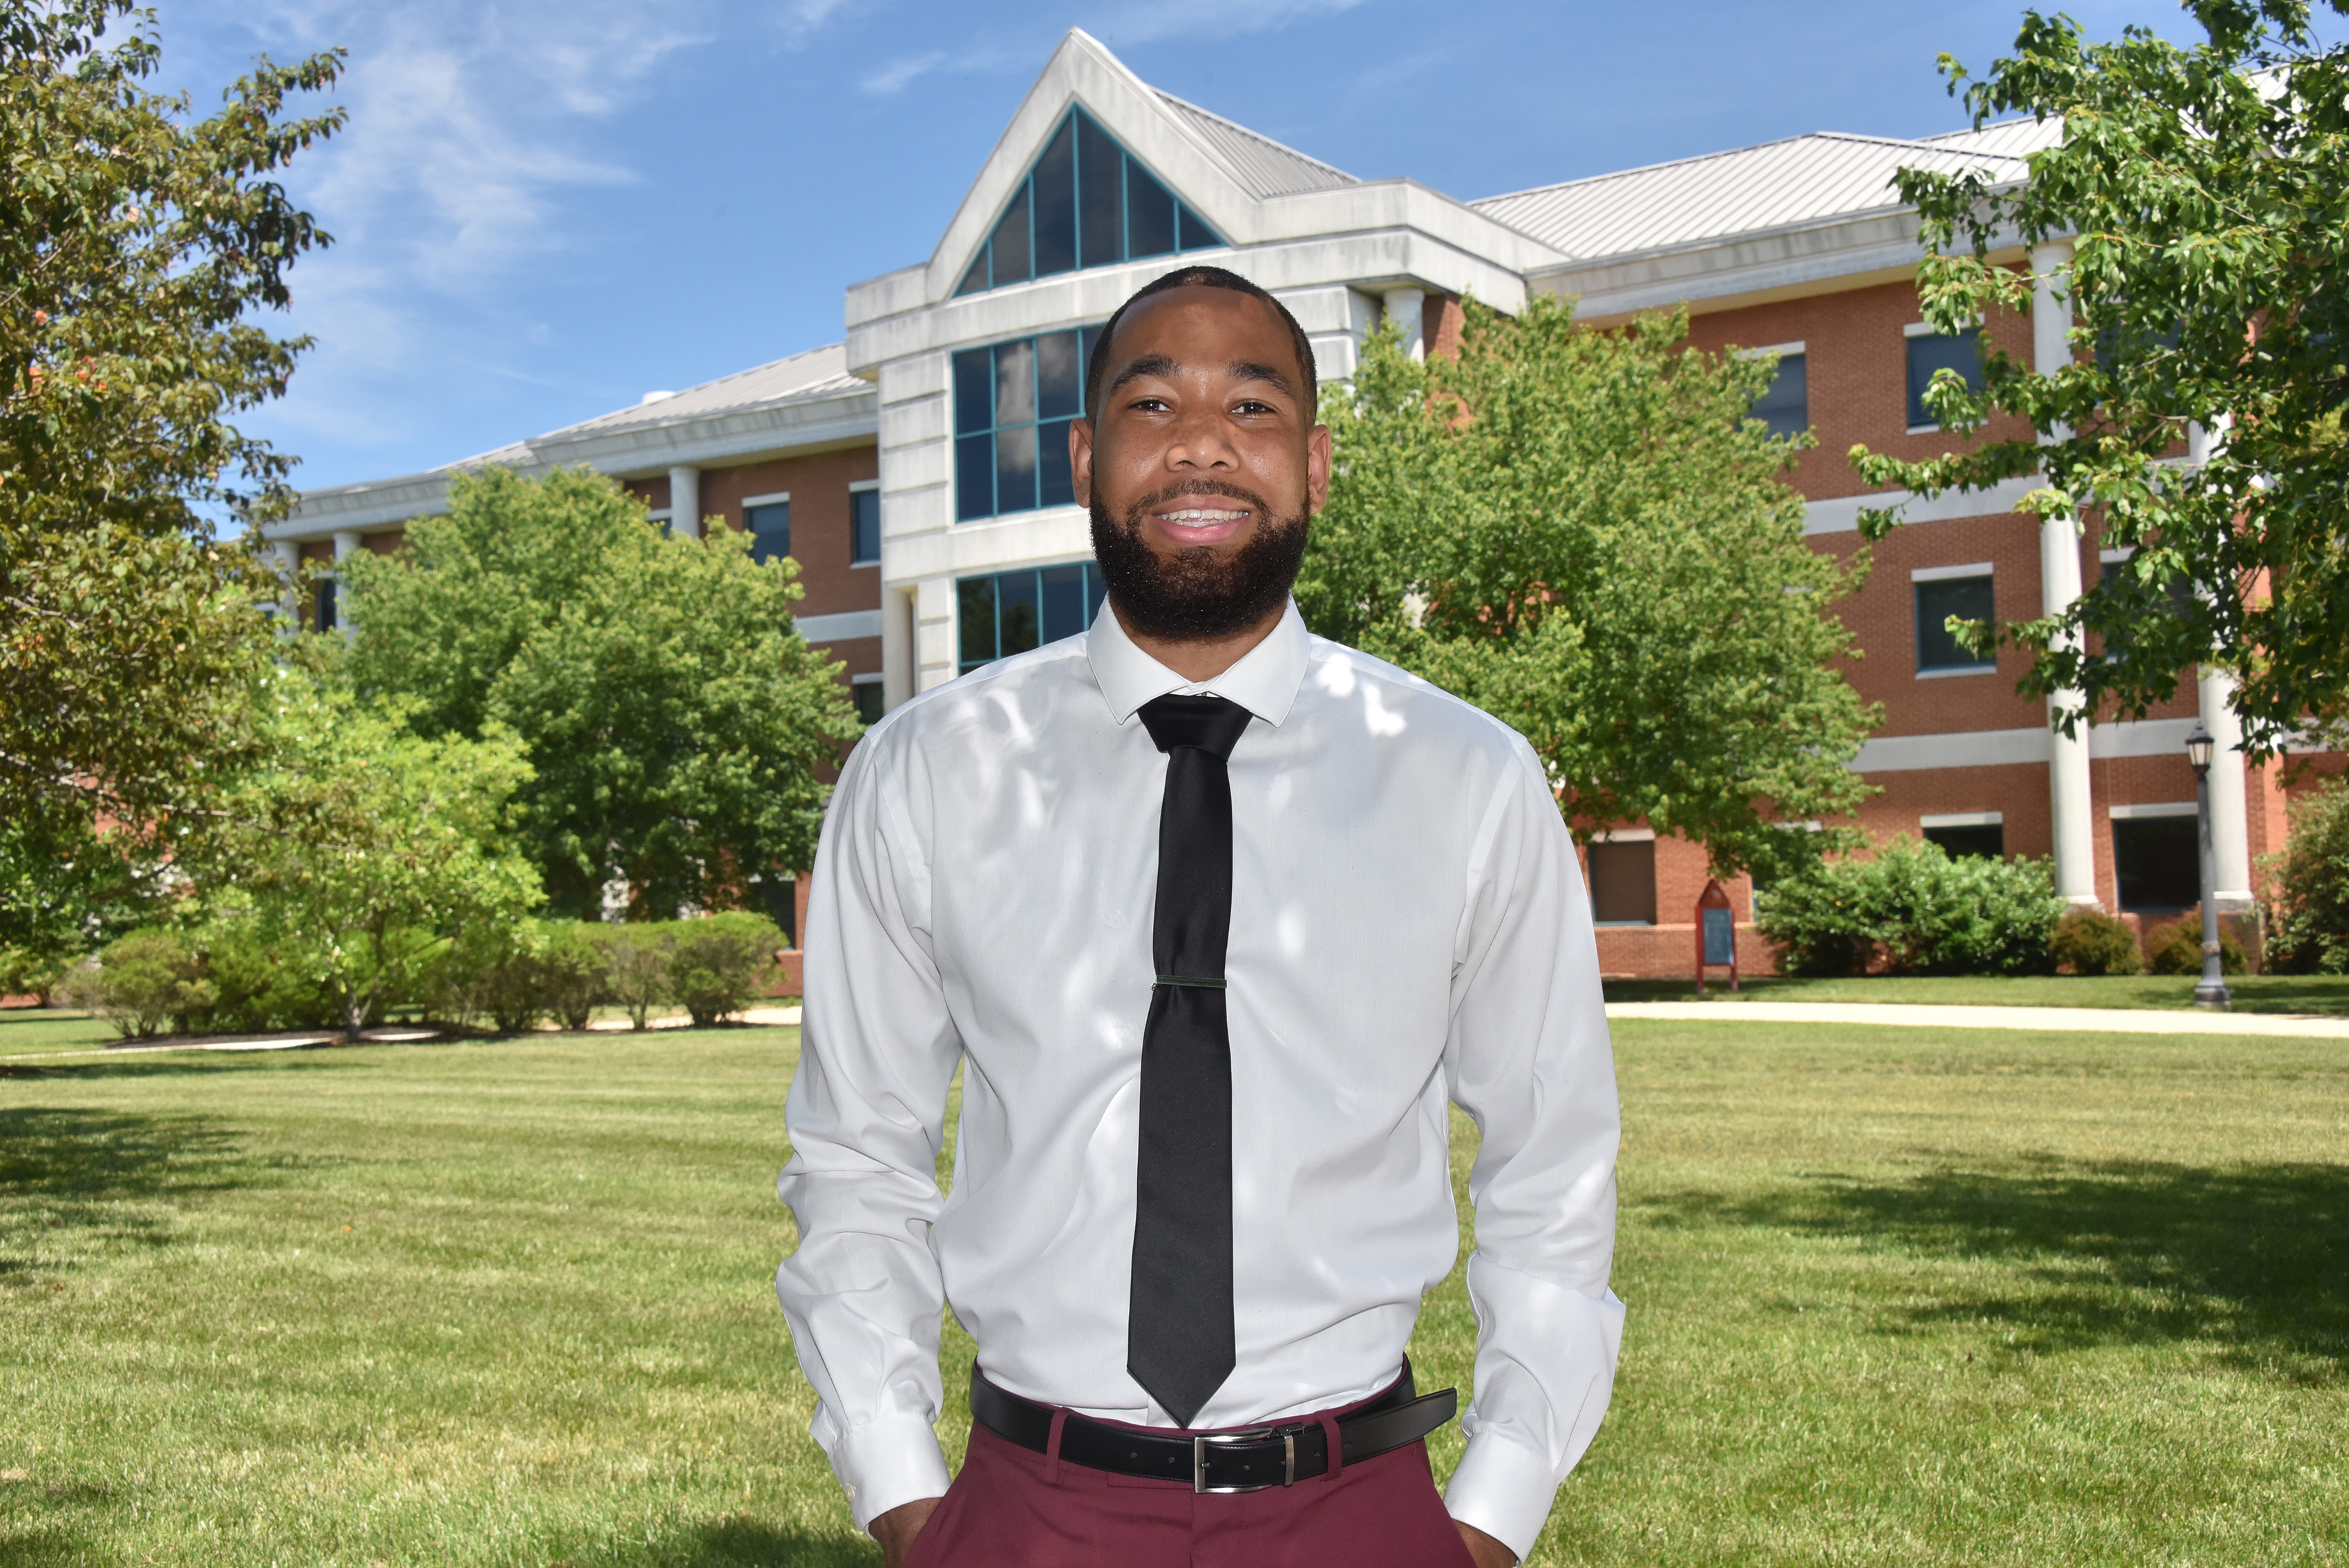 Coban Weatherspoon, a rising senior and Physics/Engineering major, has been named a 2020 HBCU Competitiveness Scholar by the White House Initiative on Historically Black Colleges and Universities.